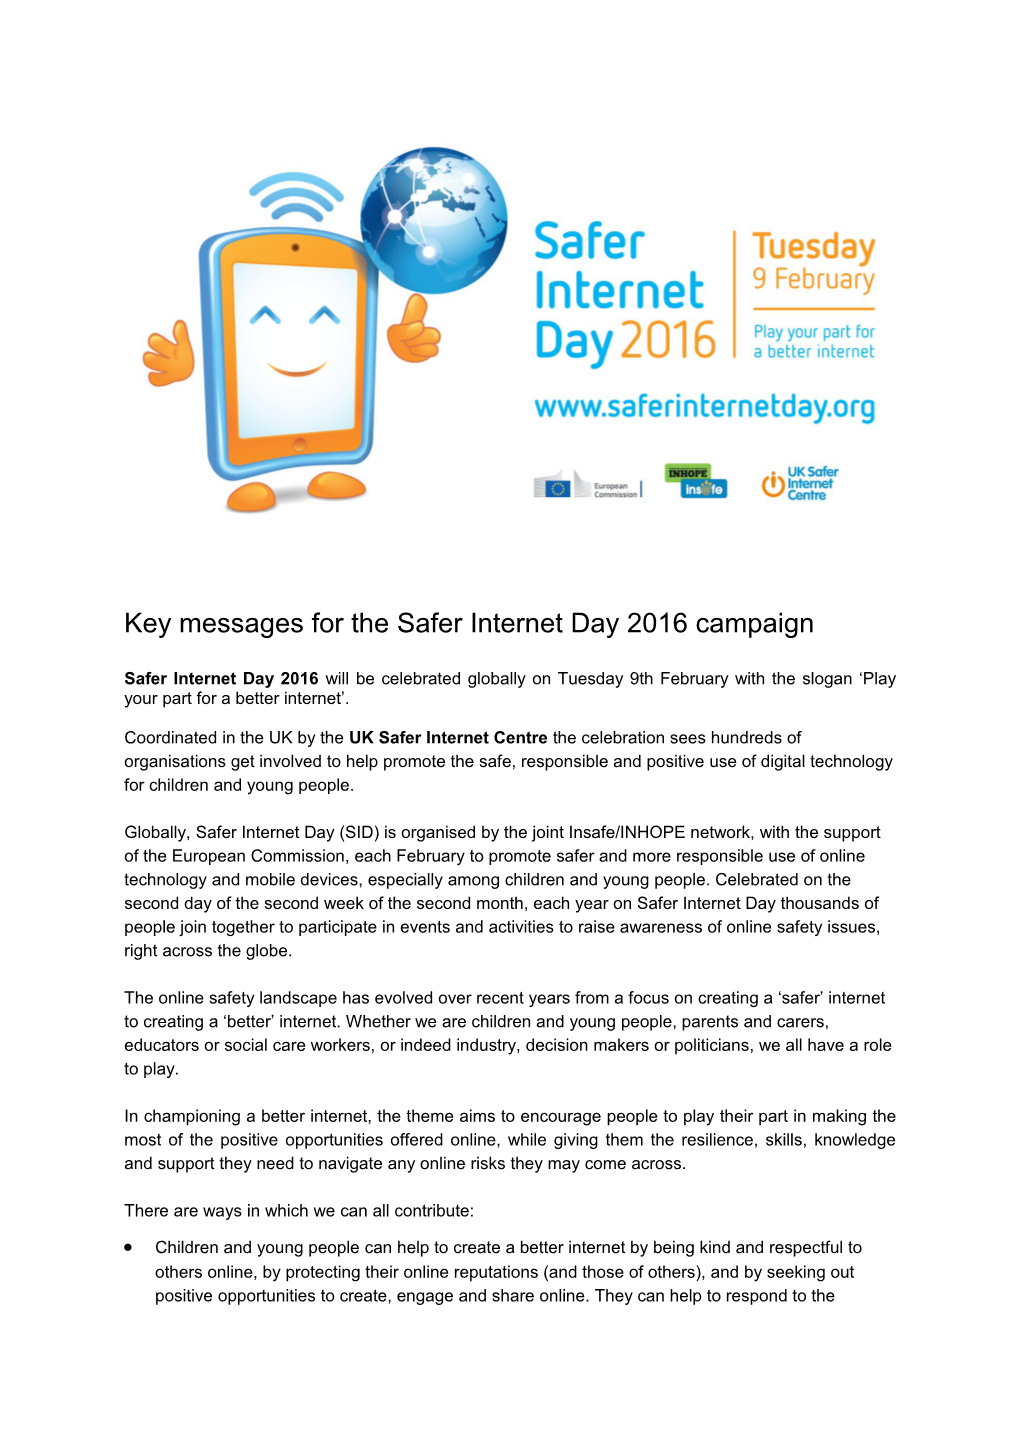 Key Messages for the Safer Internet Day 2016 Campaign